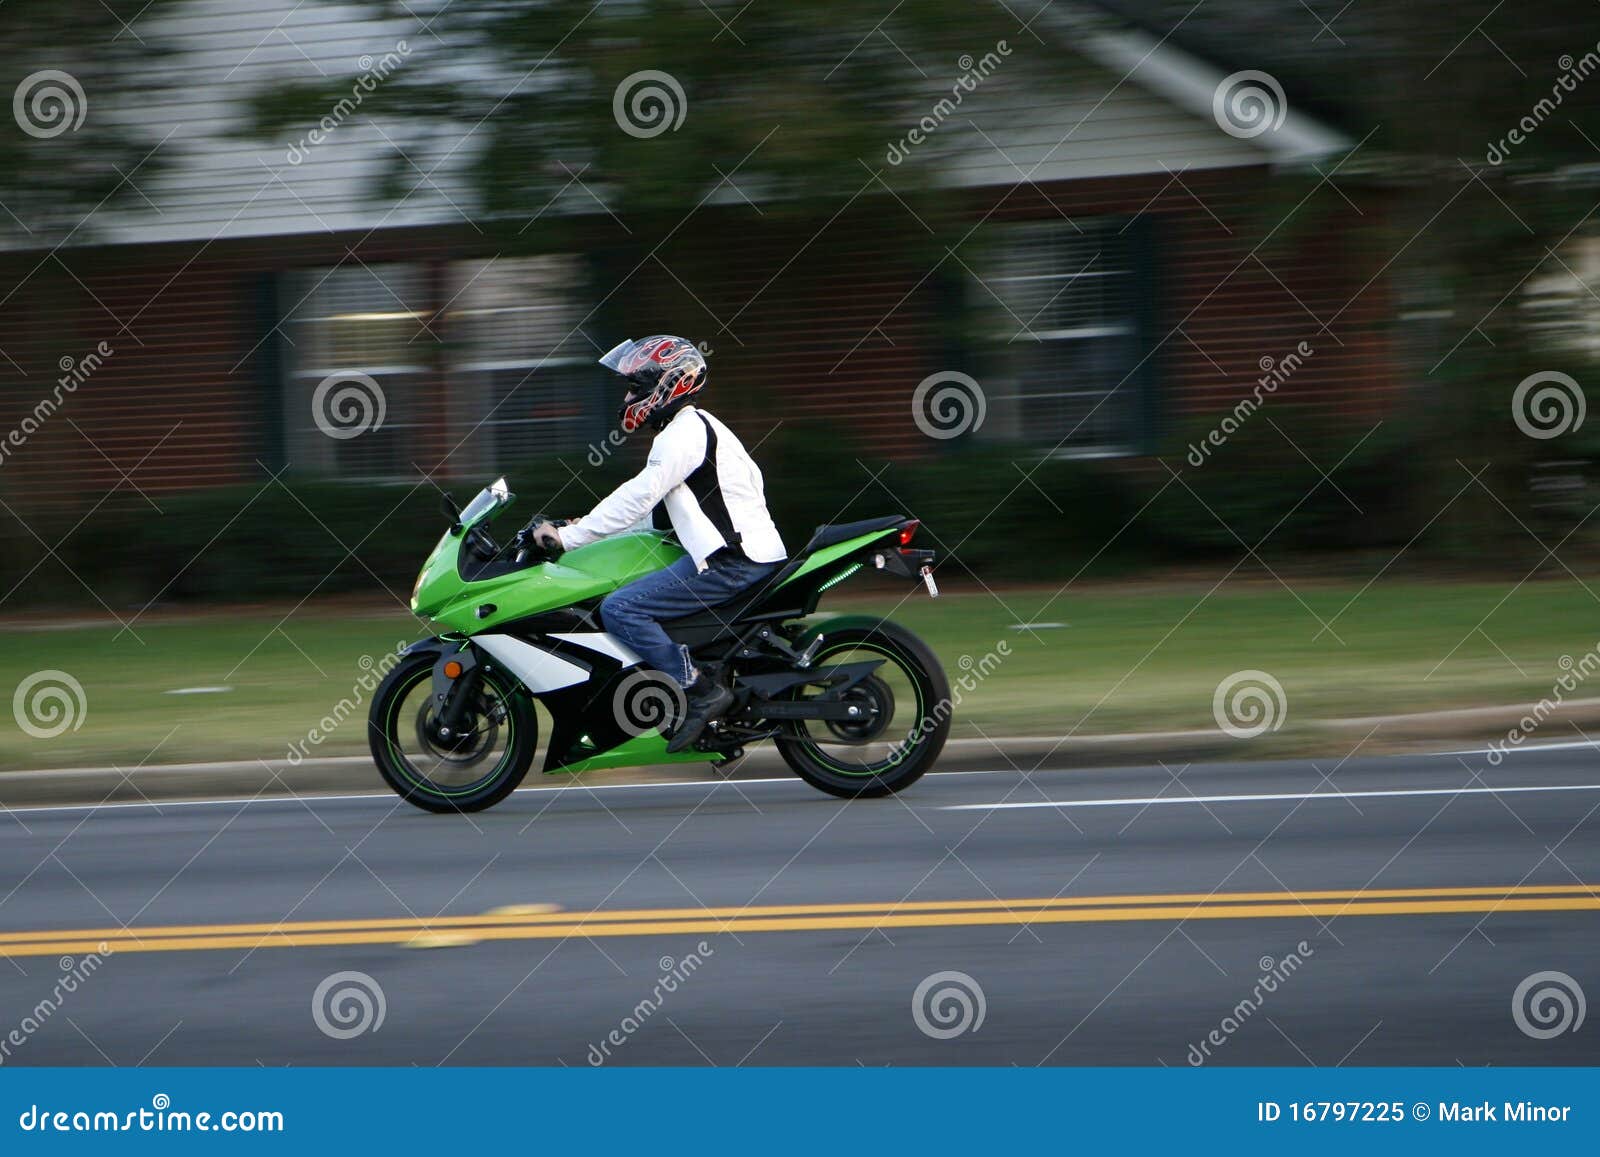 Fast motorcycle stock image. Image of riding, ride